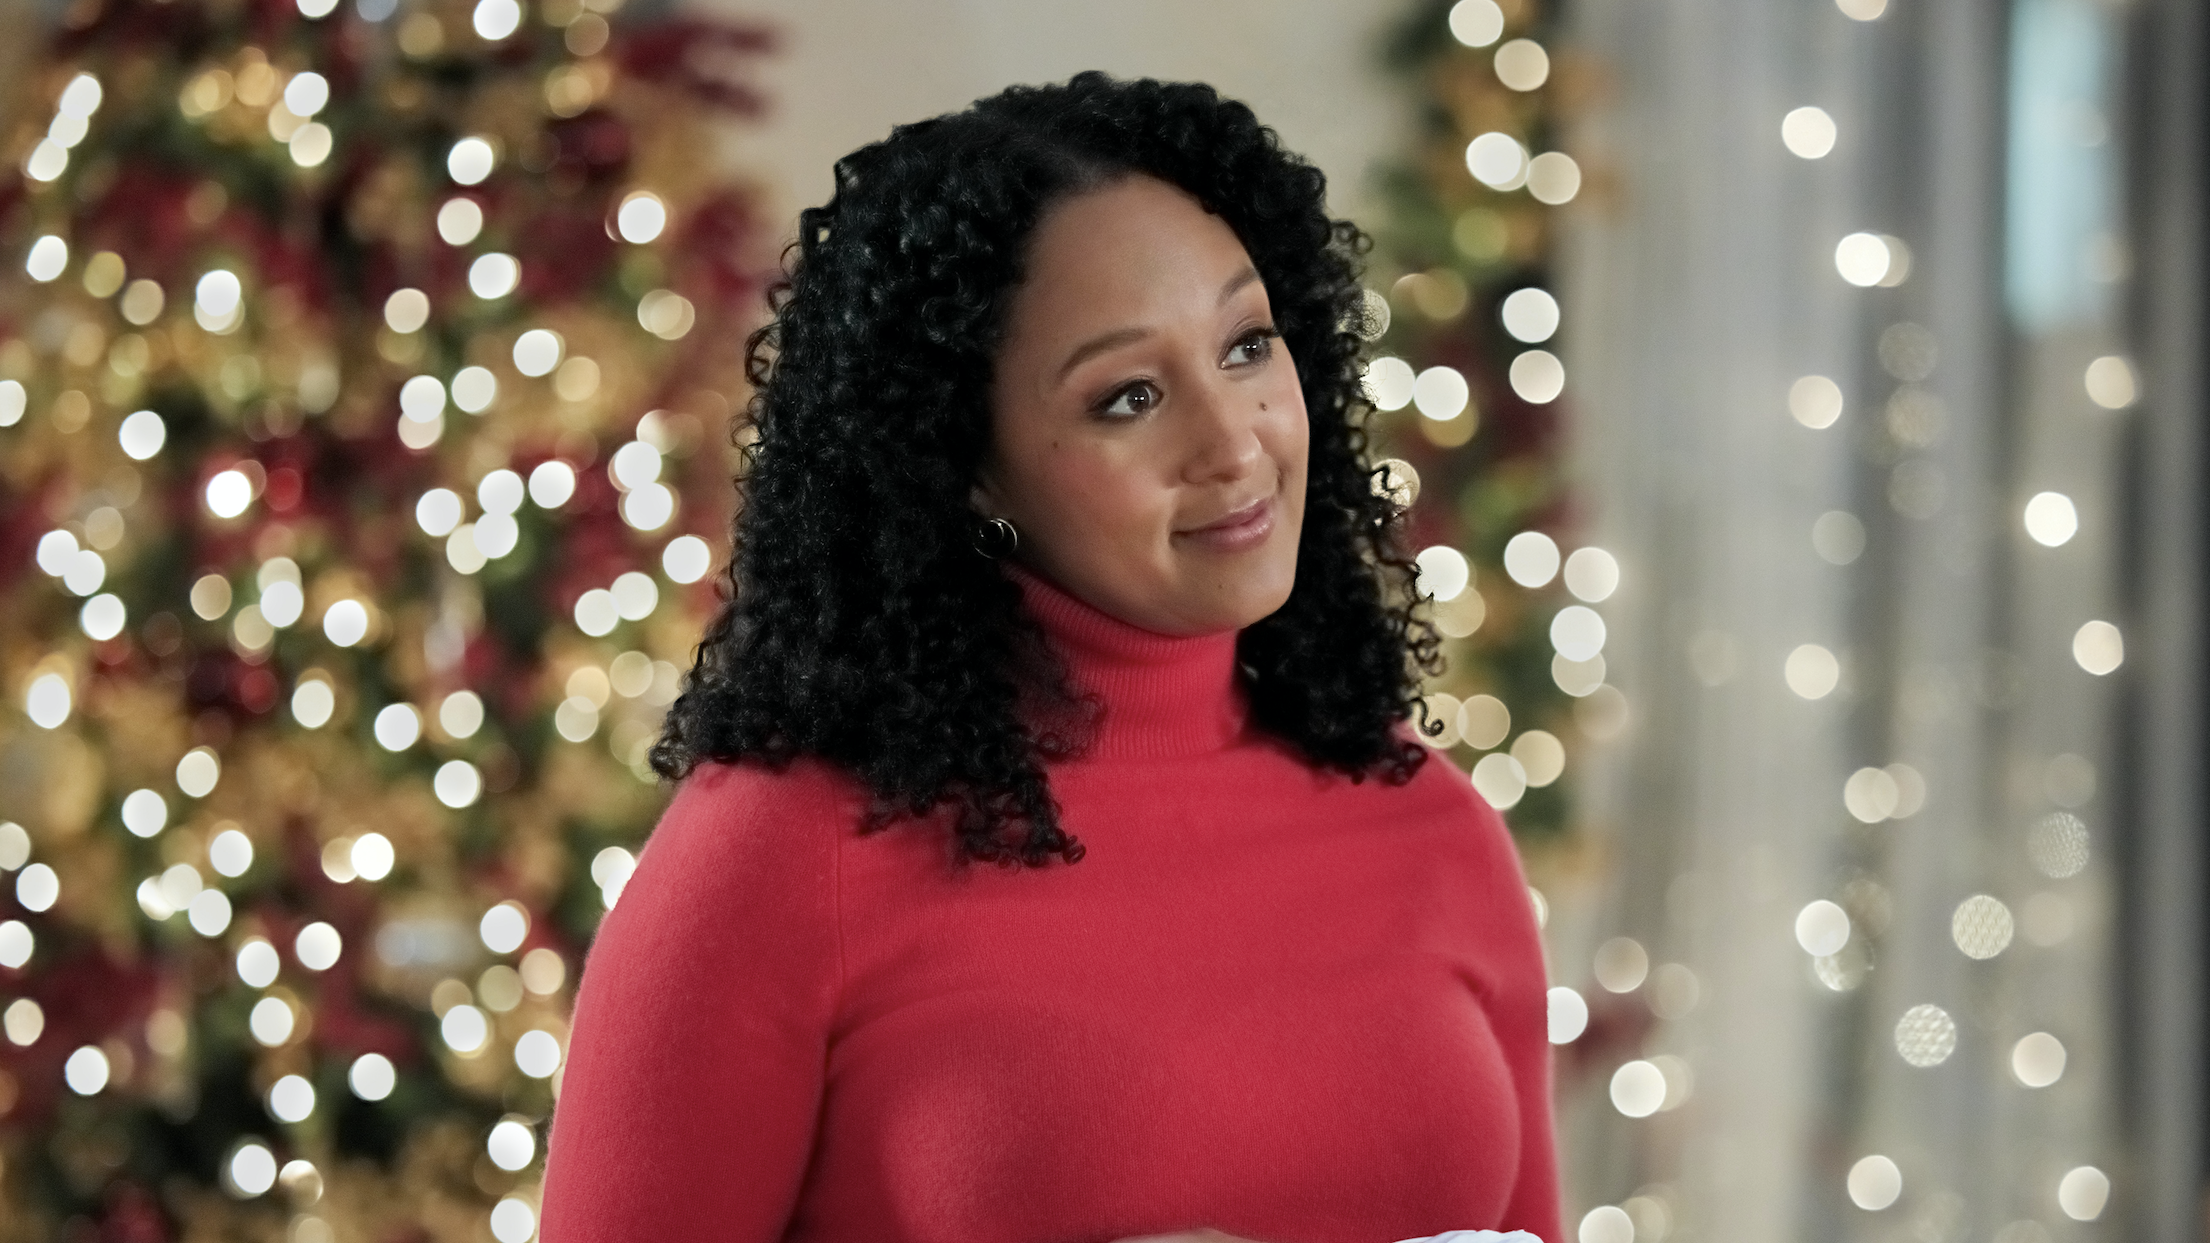 Here's Every New Hallmark Christmas Movie Coming in 2022